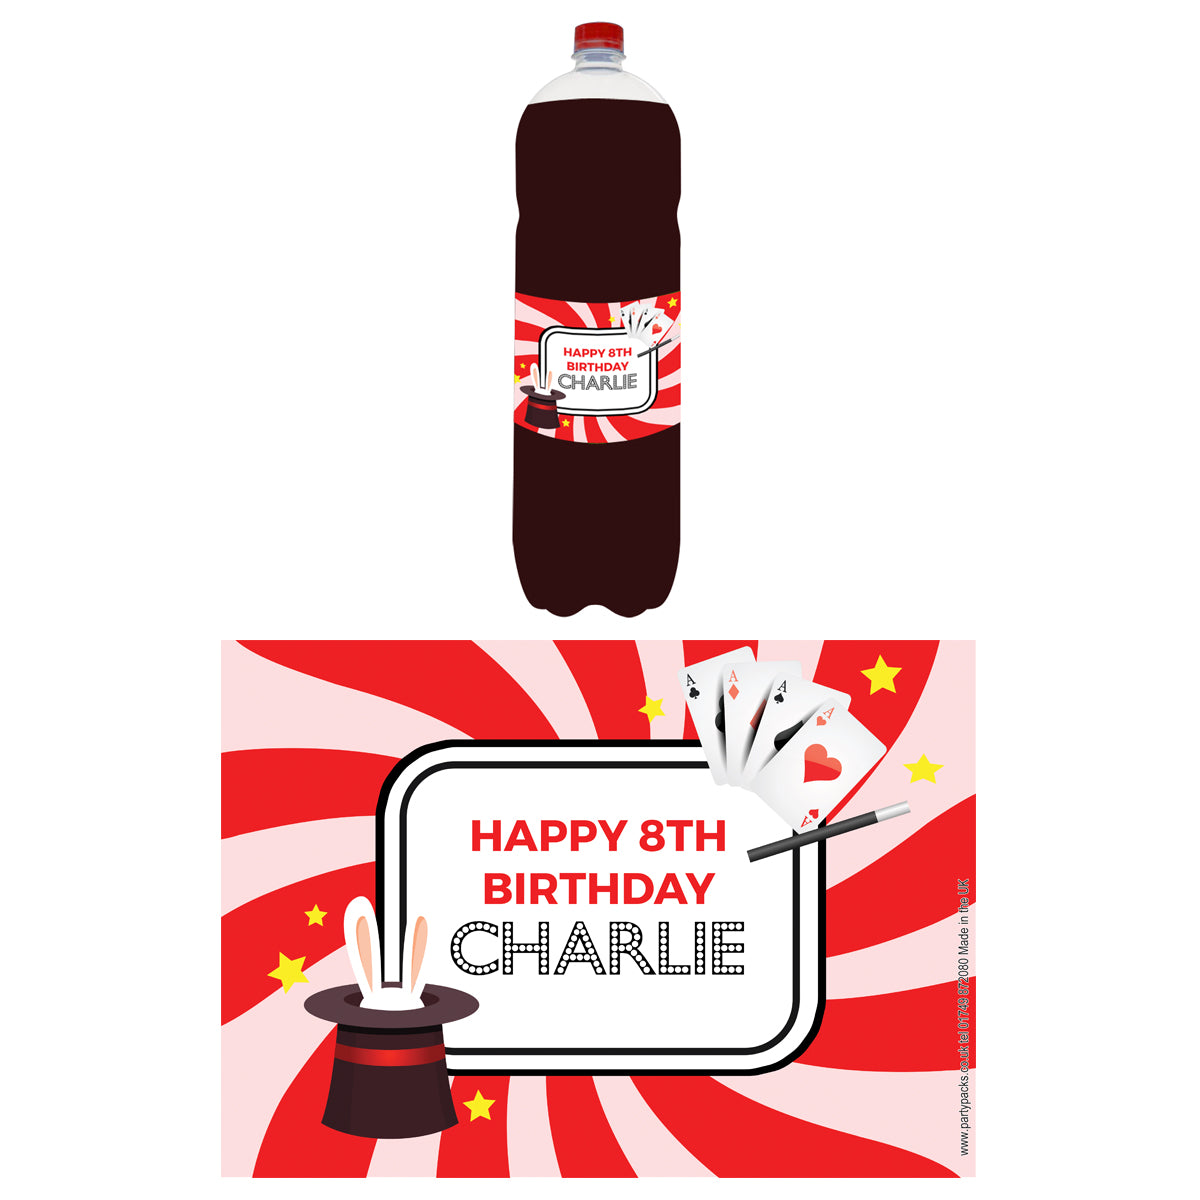 Personalised Bottle Labels - Magic Party - Pack of 4